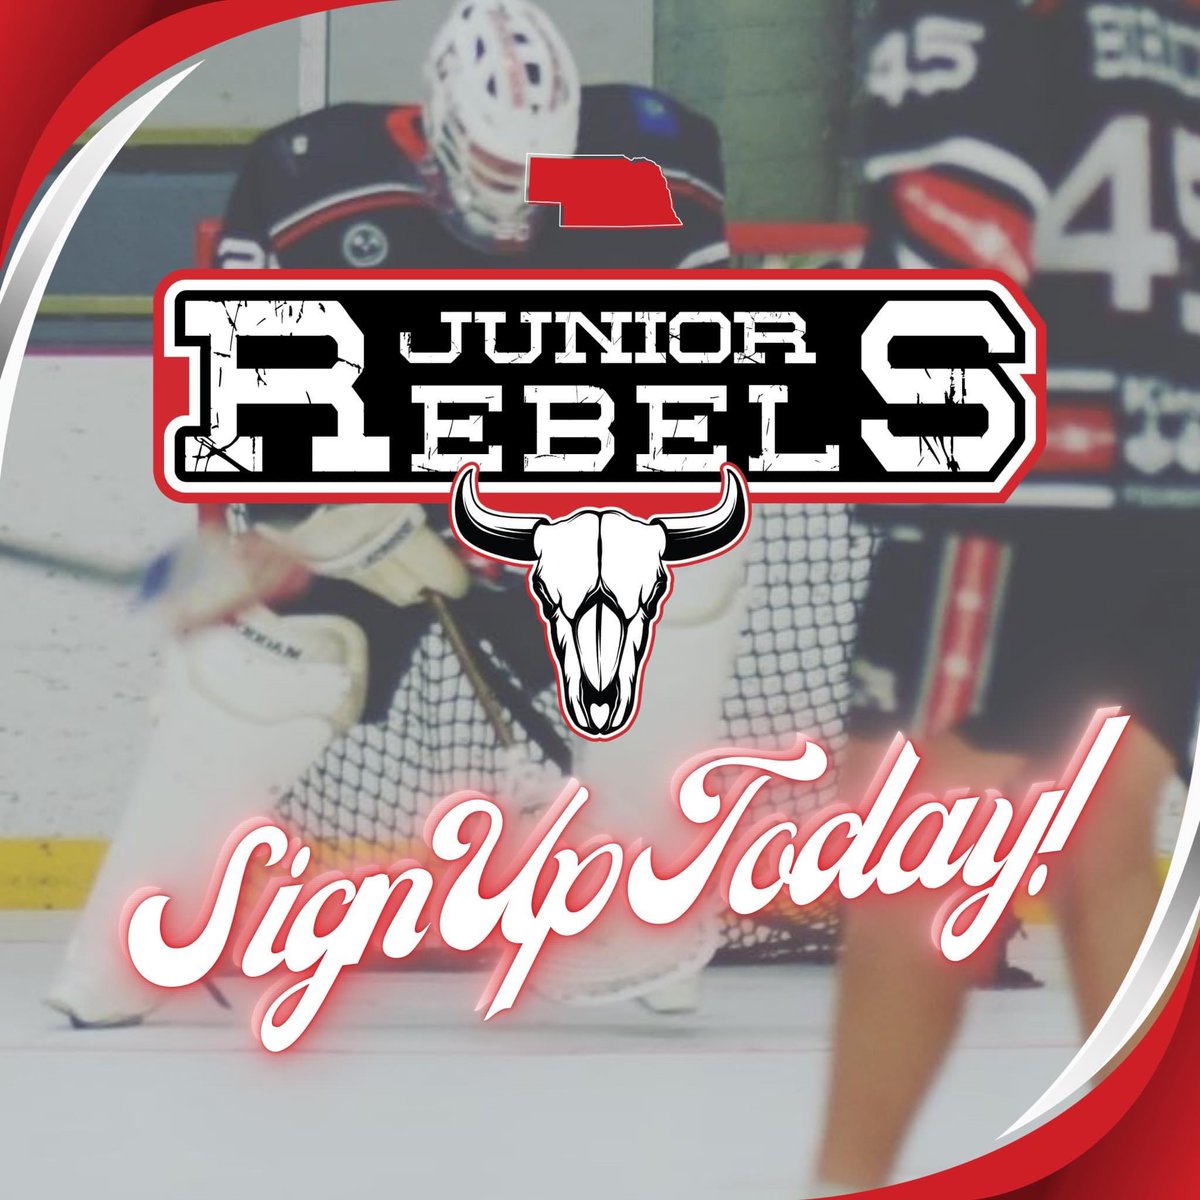 Attention high school, U12, and U10 lacrosse players in Nebraska! Dive into the thrill of box lacrosse and elevate your game with the Junior Rebels! 

Click here —-> omaharebels.com/jr-rebels to sign up today! 🥍 

#boxlacrosse #nebraskalacrosse #BleedReb @omaharebelslc